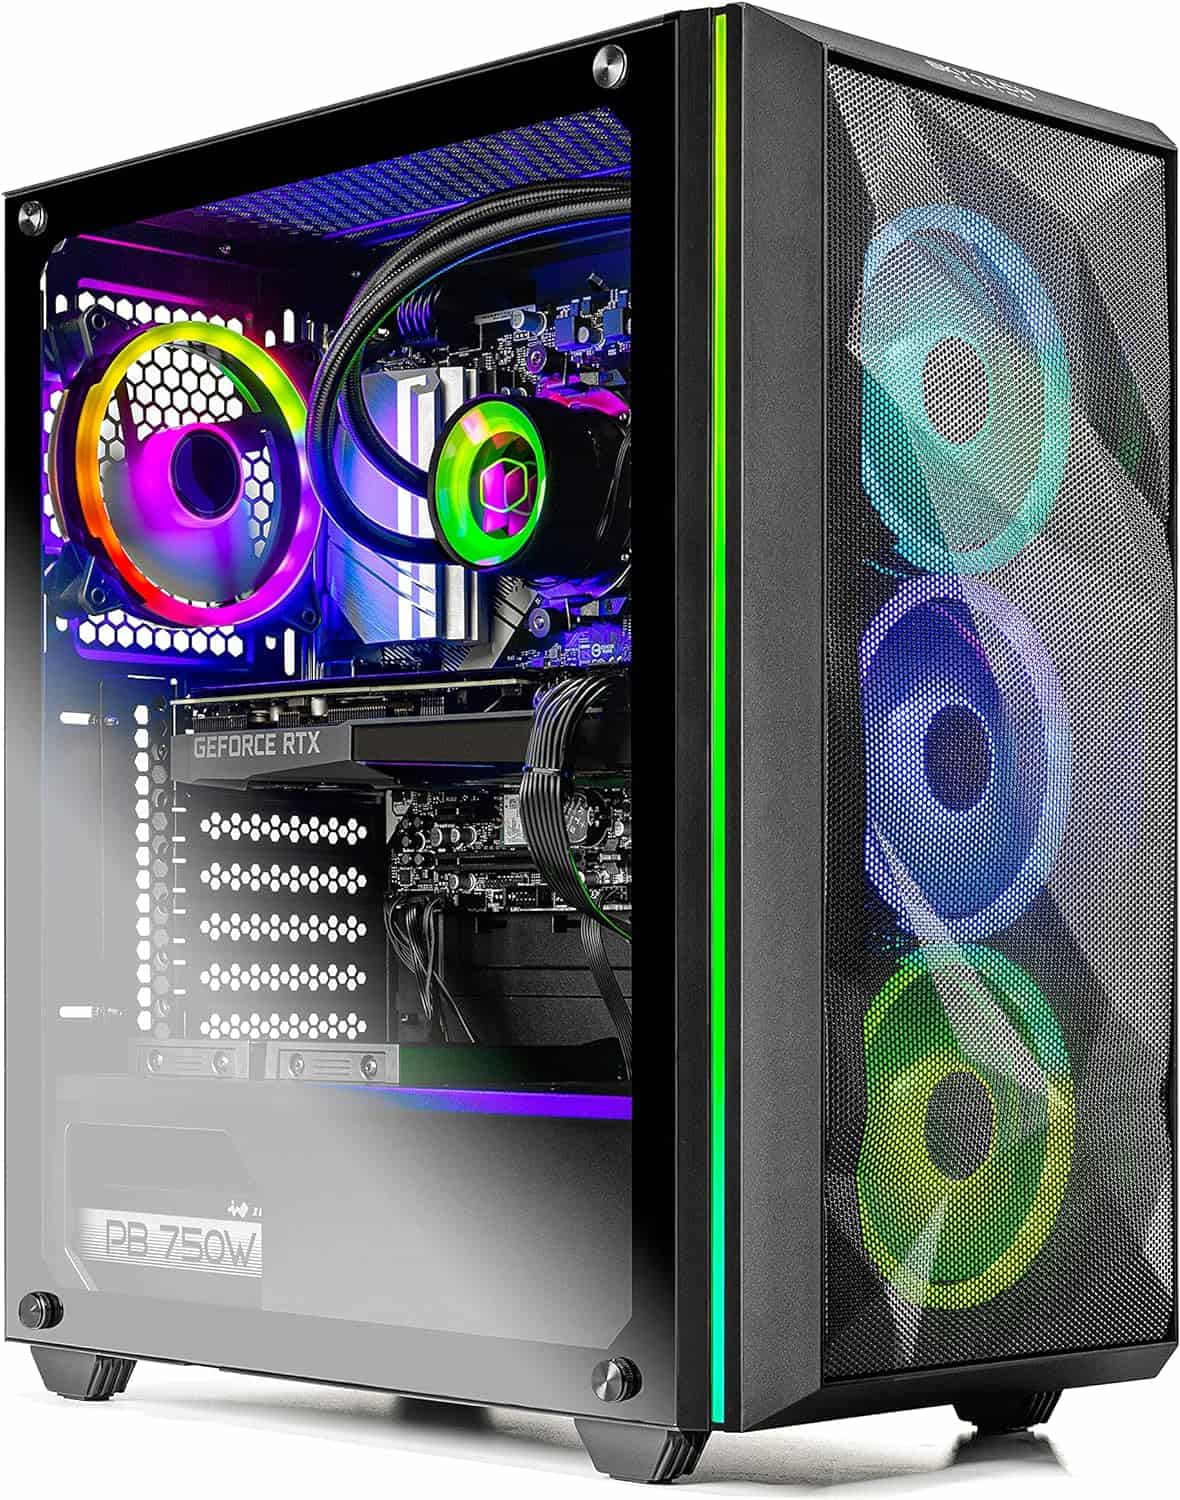 Modern gaming pc with transparent side panel showcasing colorful rgb lighting on fans and components, including a visible RTX 3080 graphics card and power supply.